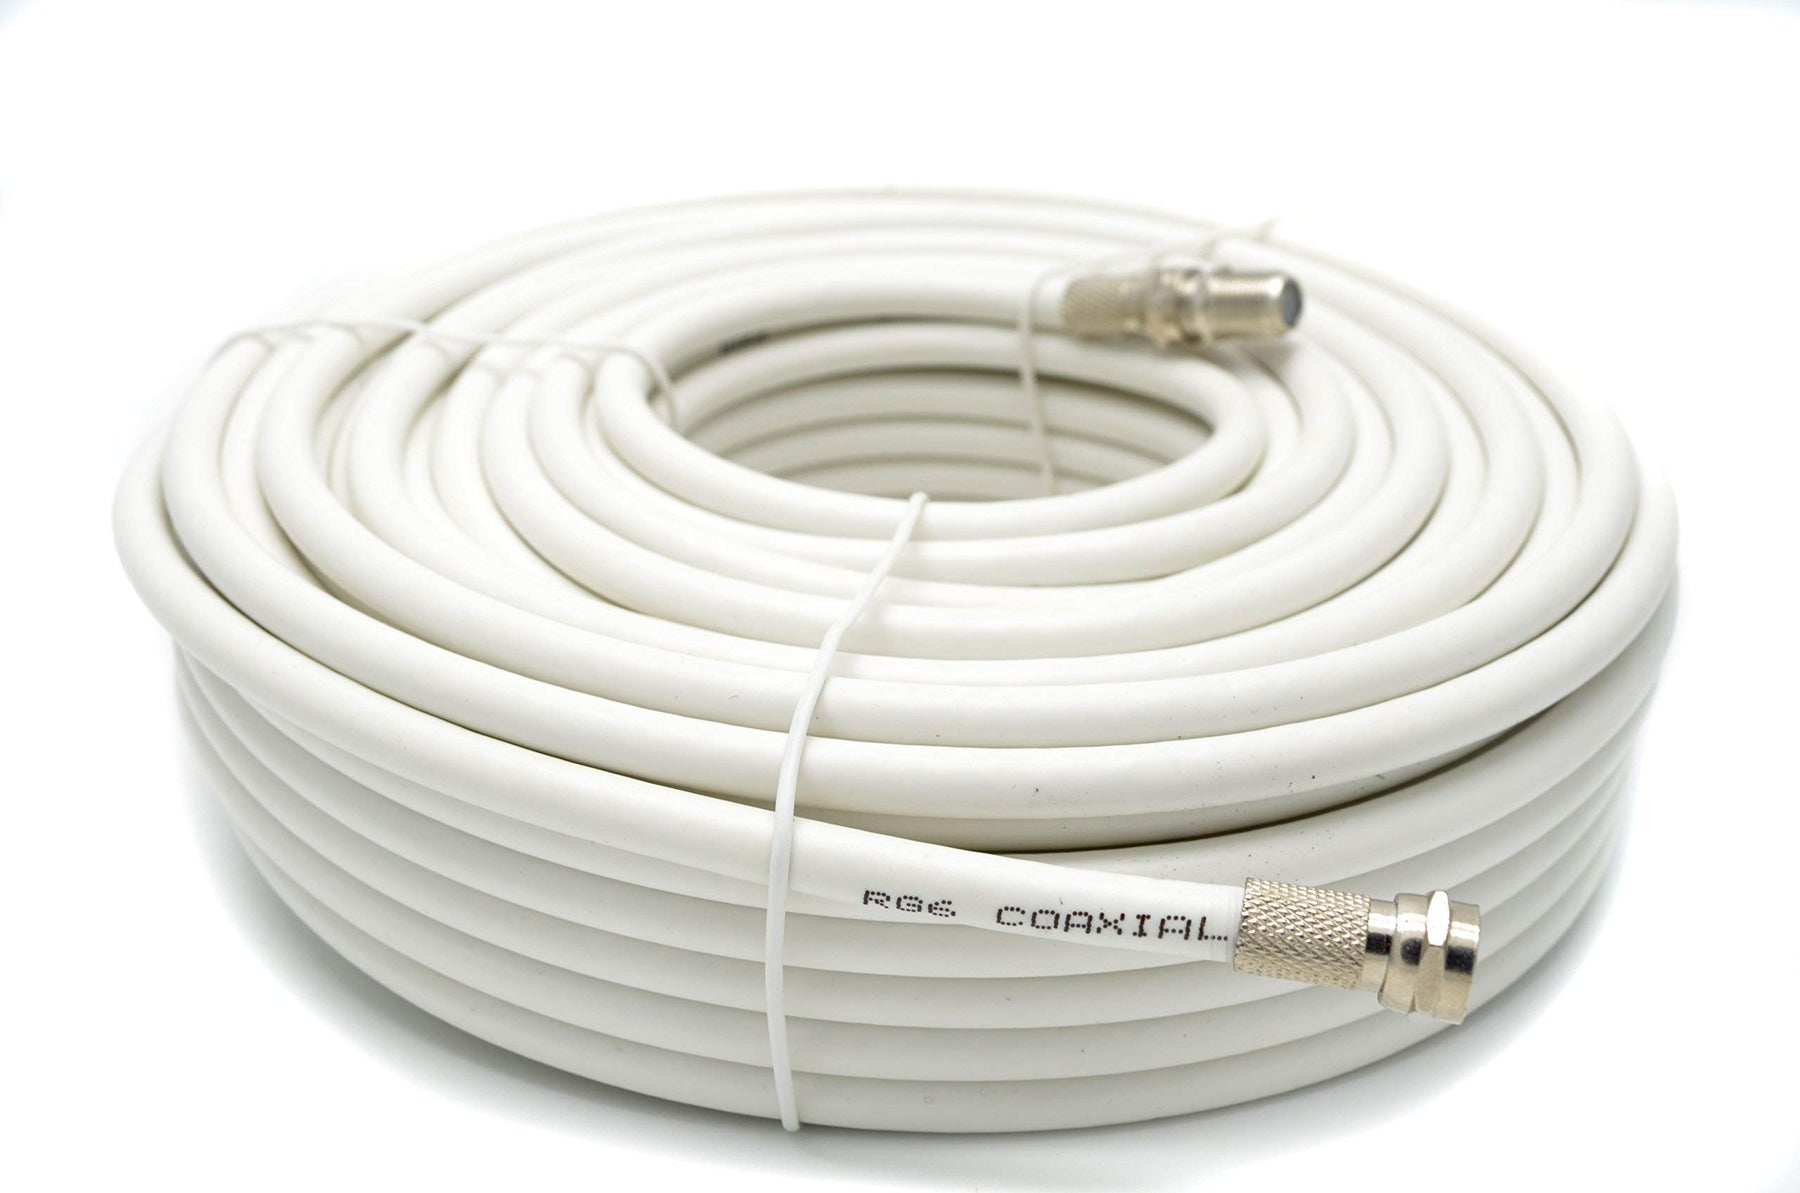 Viewi 15 Meter RG6 Satellite TV Coax Cable Extension Kit with Fitted F Connectors for Sky HD, Freesat & Virgin - White (15 Meter, White)